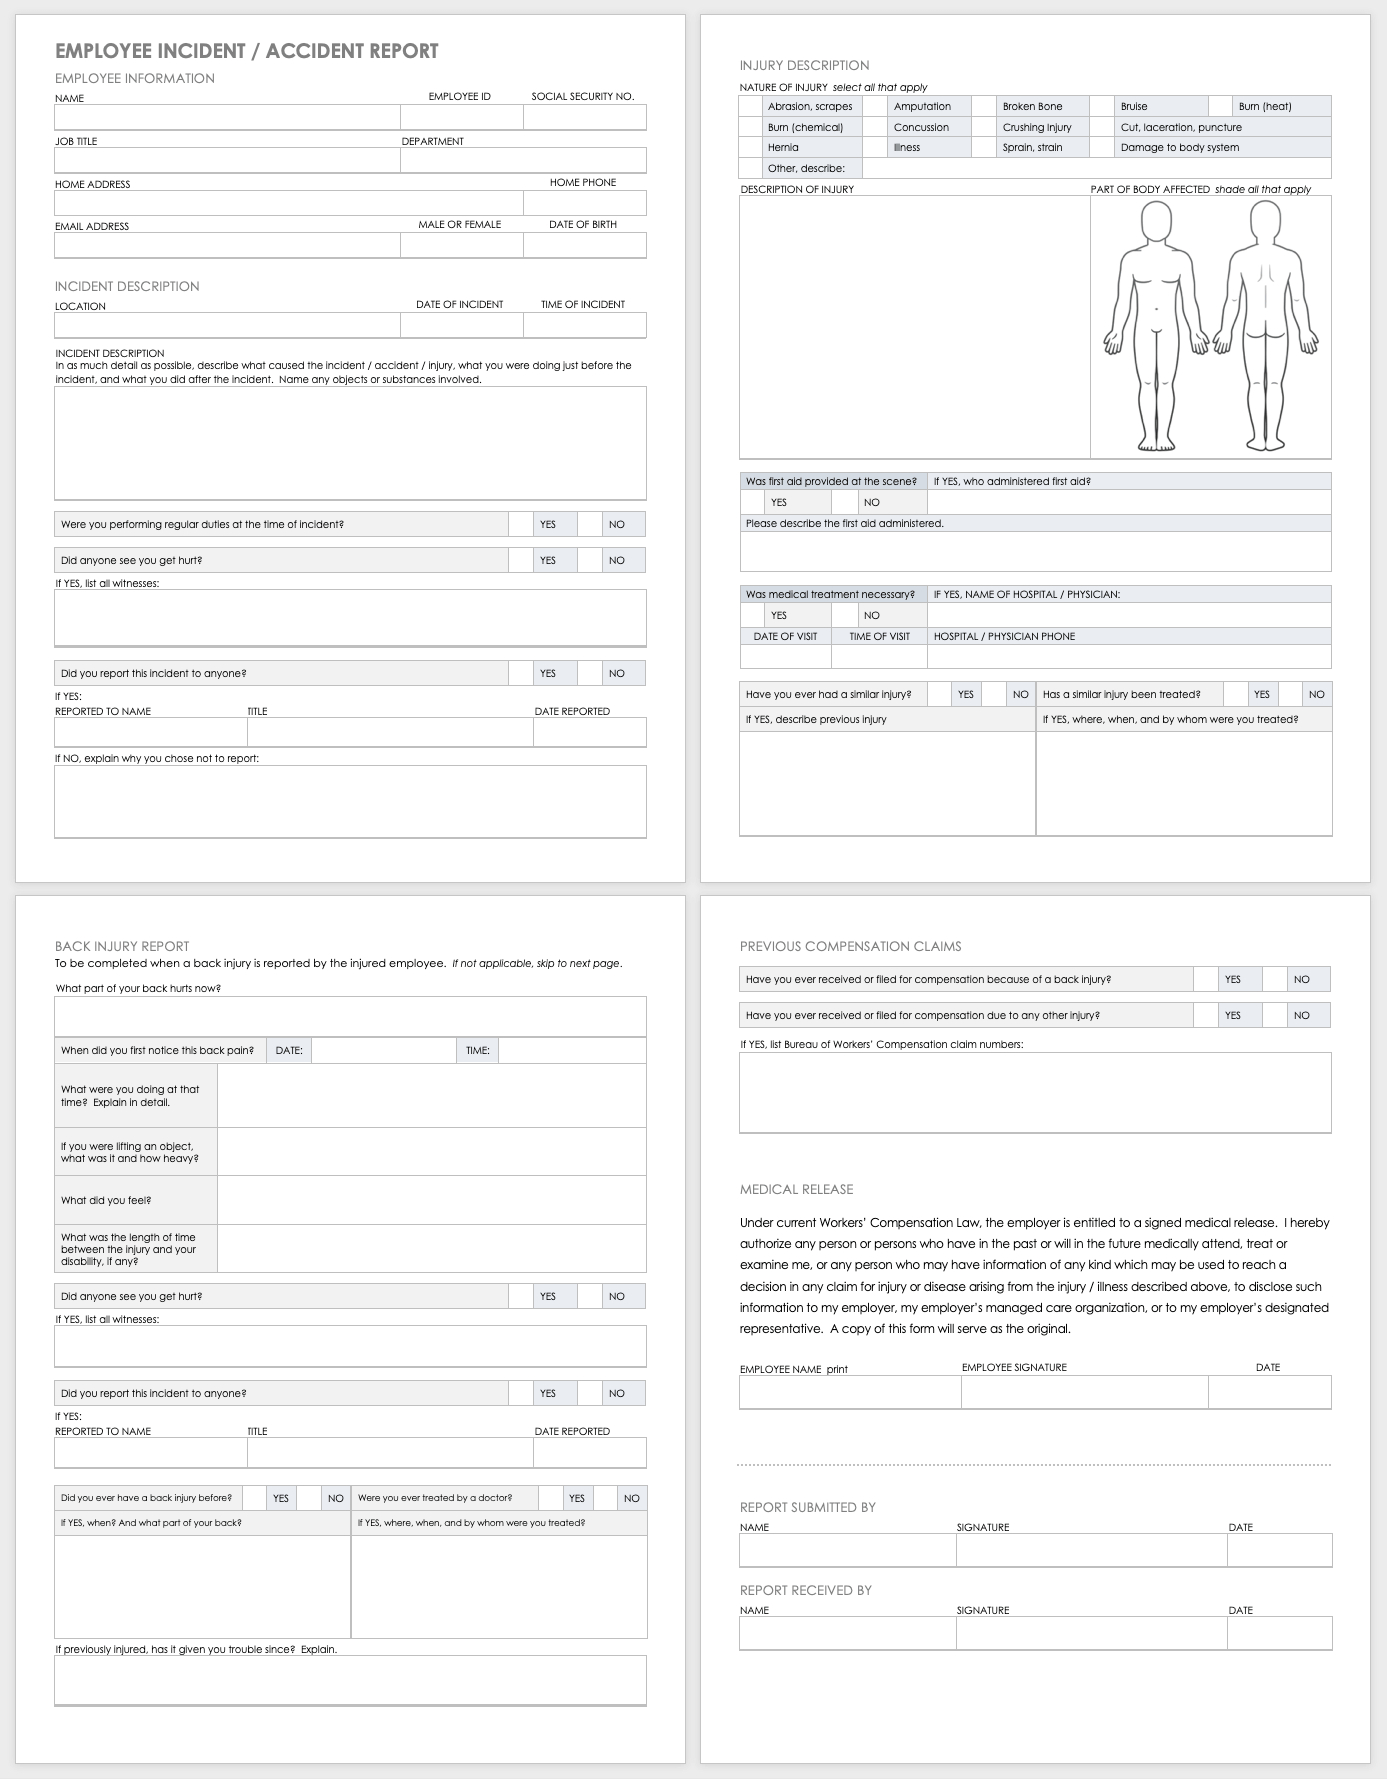 Free Workplace Accident Report Templates | Smartsheet In Employee Incident Report Templates